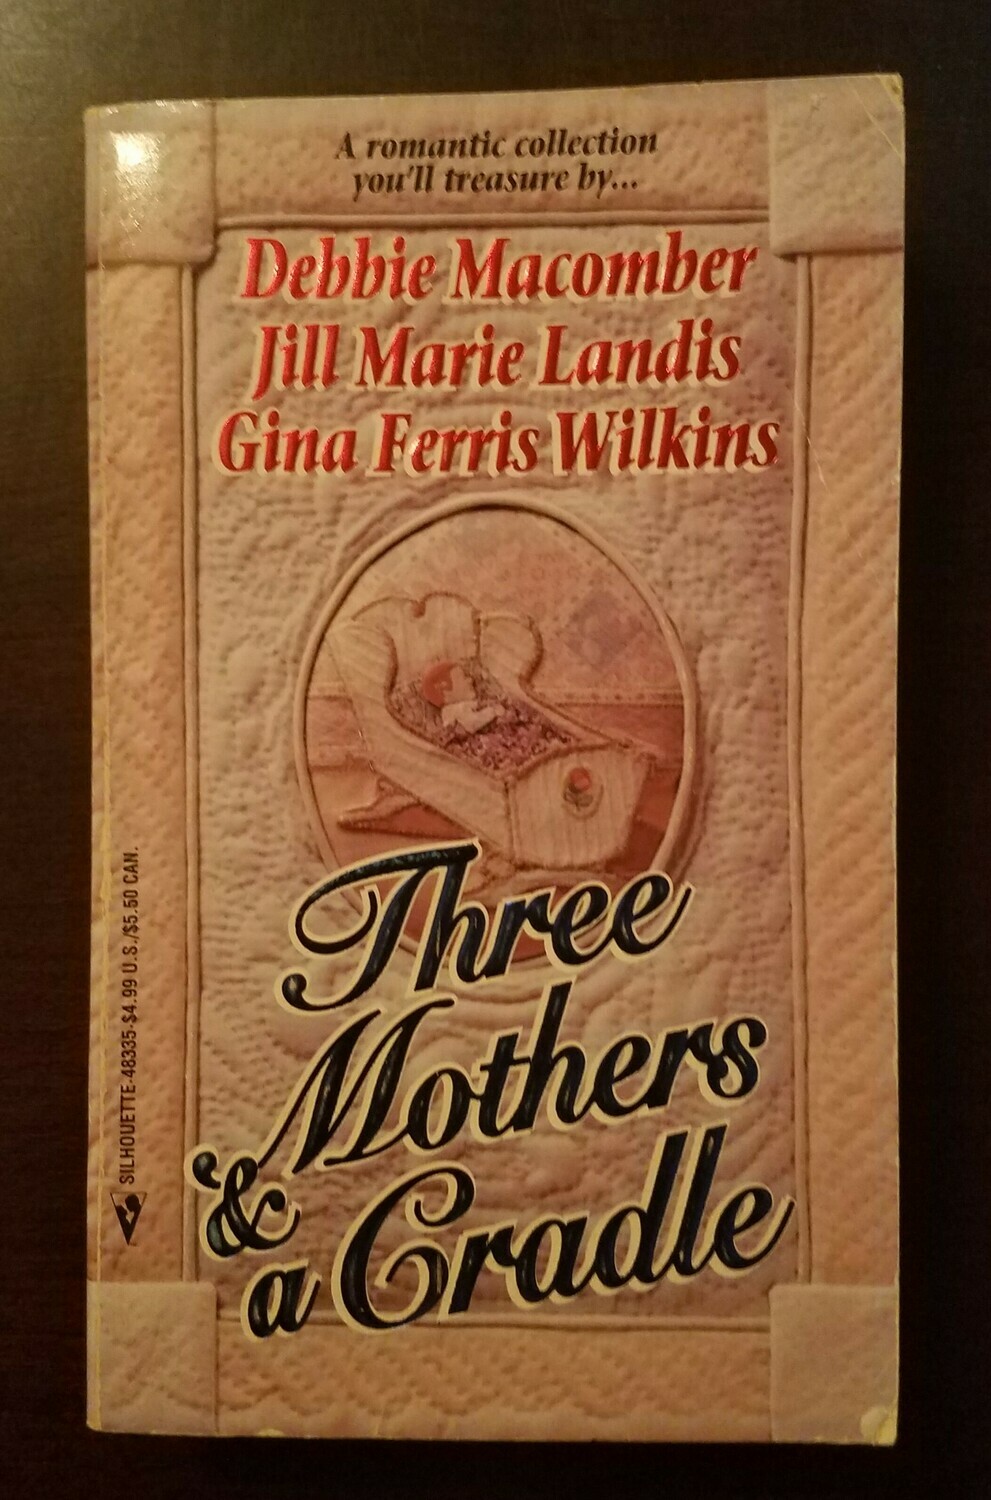 Three Mothers and a Cradle by Debbie Macomber, Jill Marie Landis, and Gina Ferris Wilkins